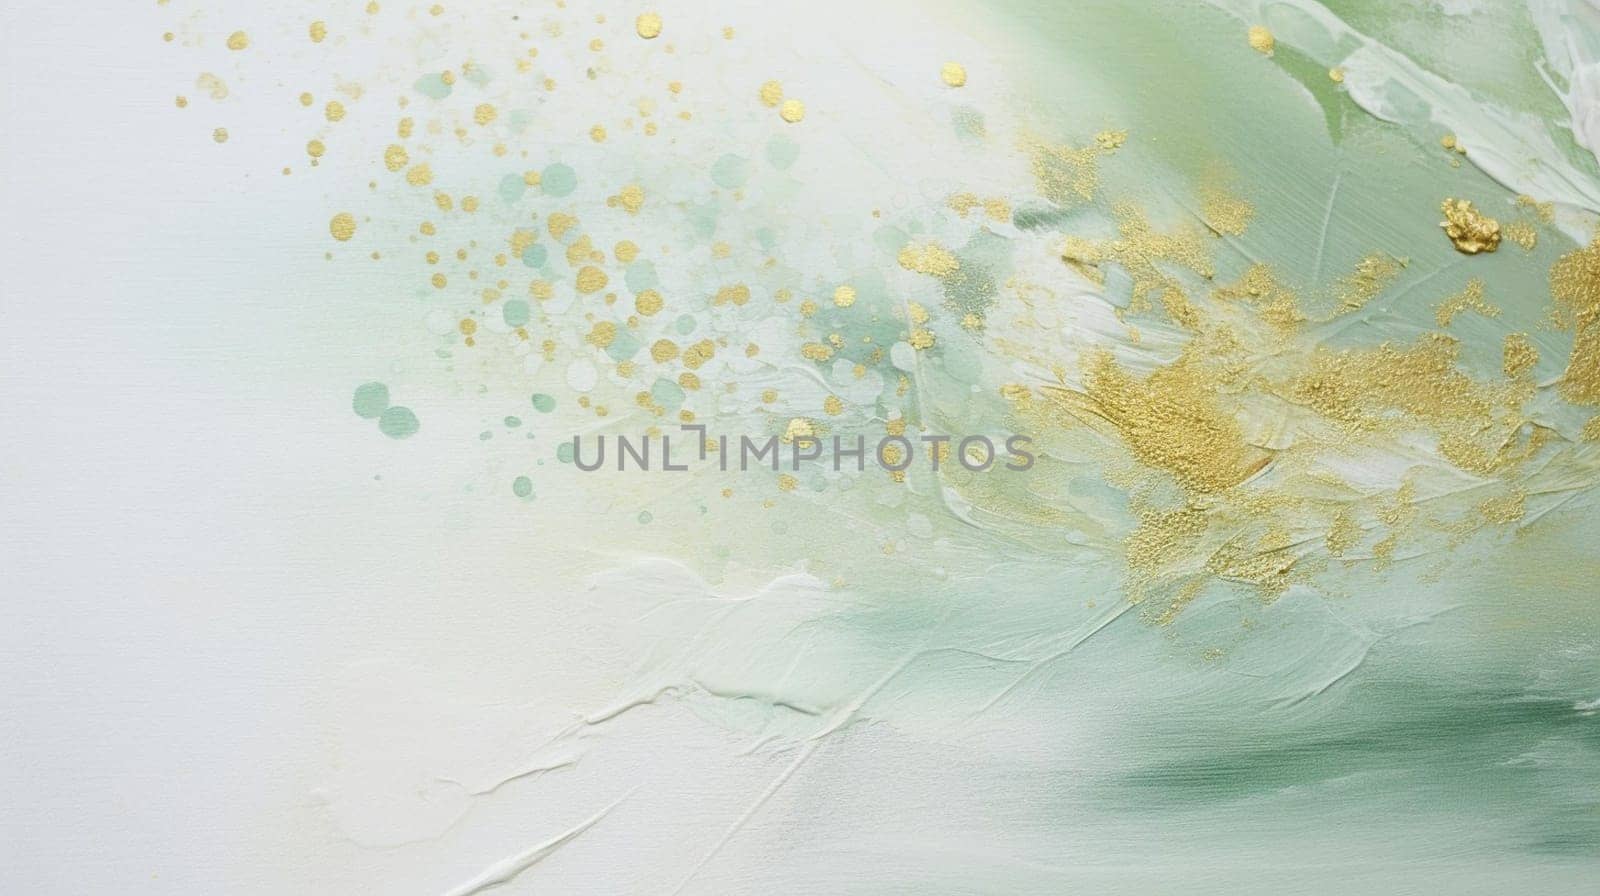 Macro photography of a fluid green and gold painting on a white background by kizuneko